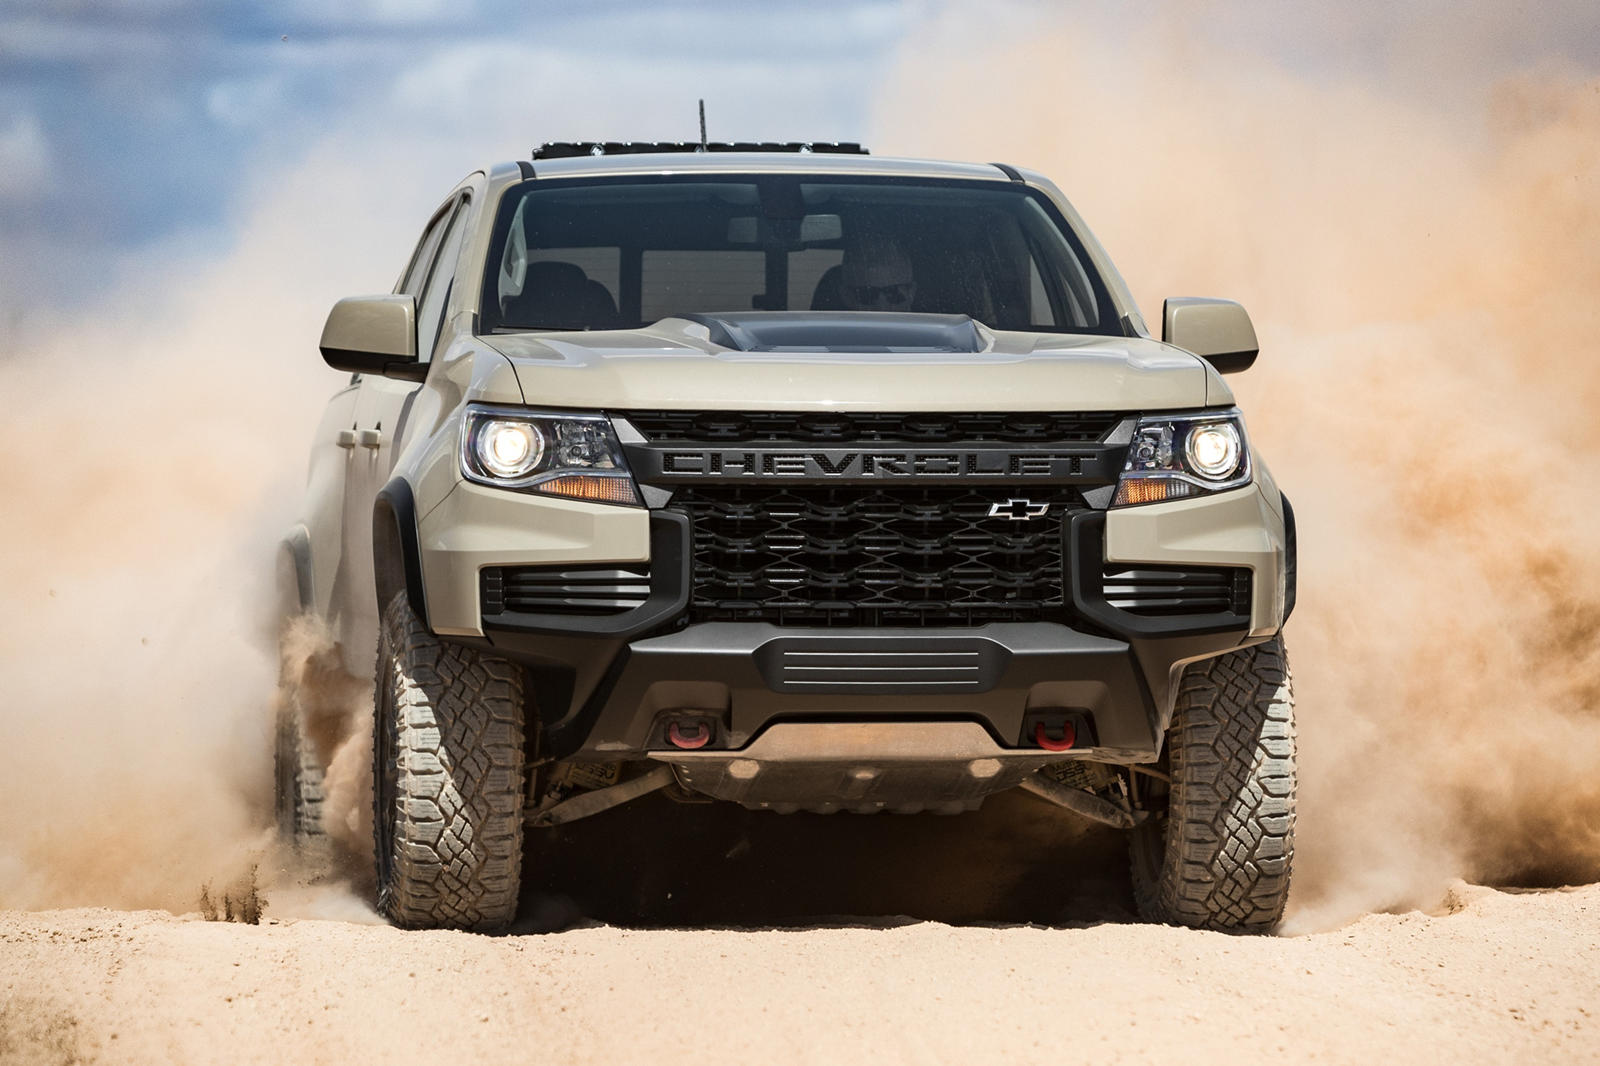 2021 Chevrolet Colorado Is Here To Fight The Ford Ranger